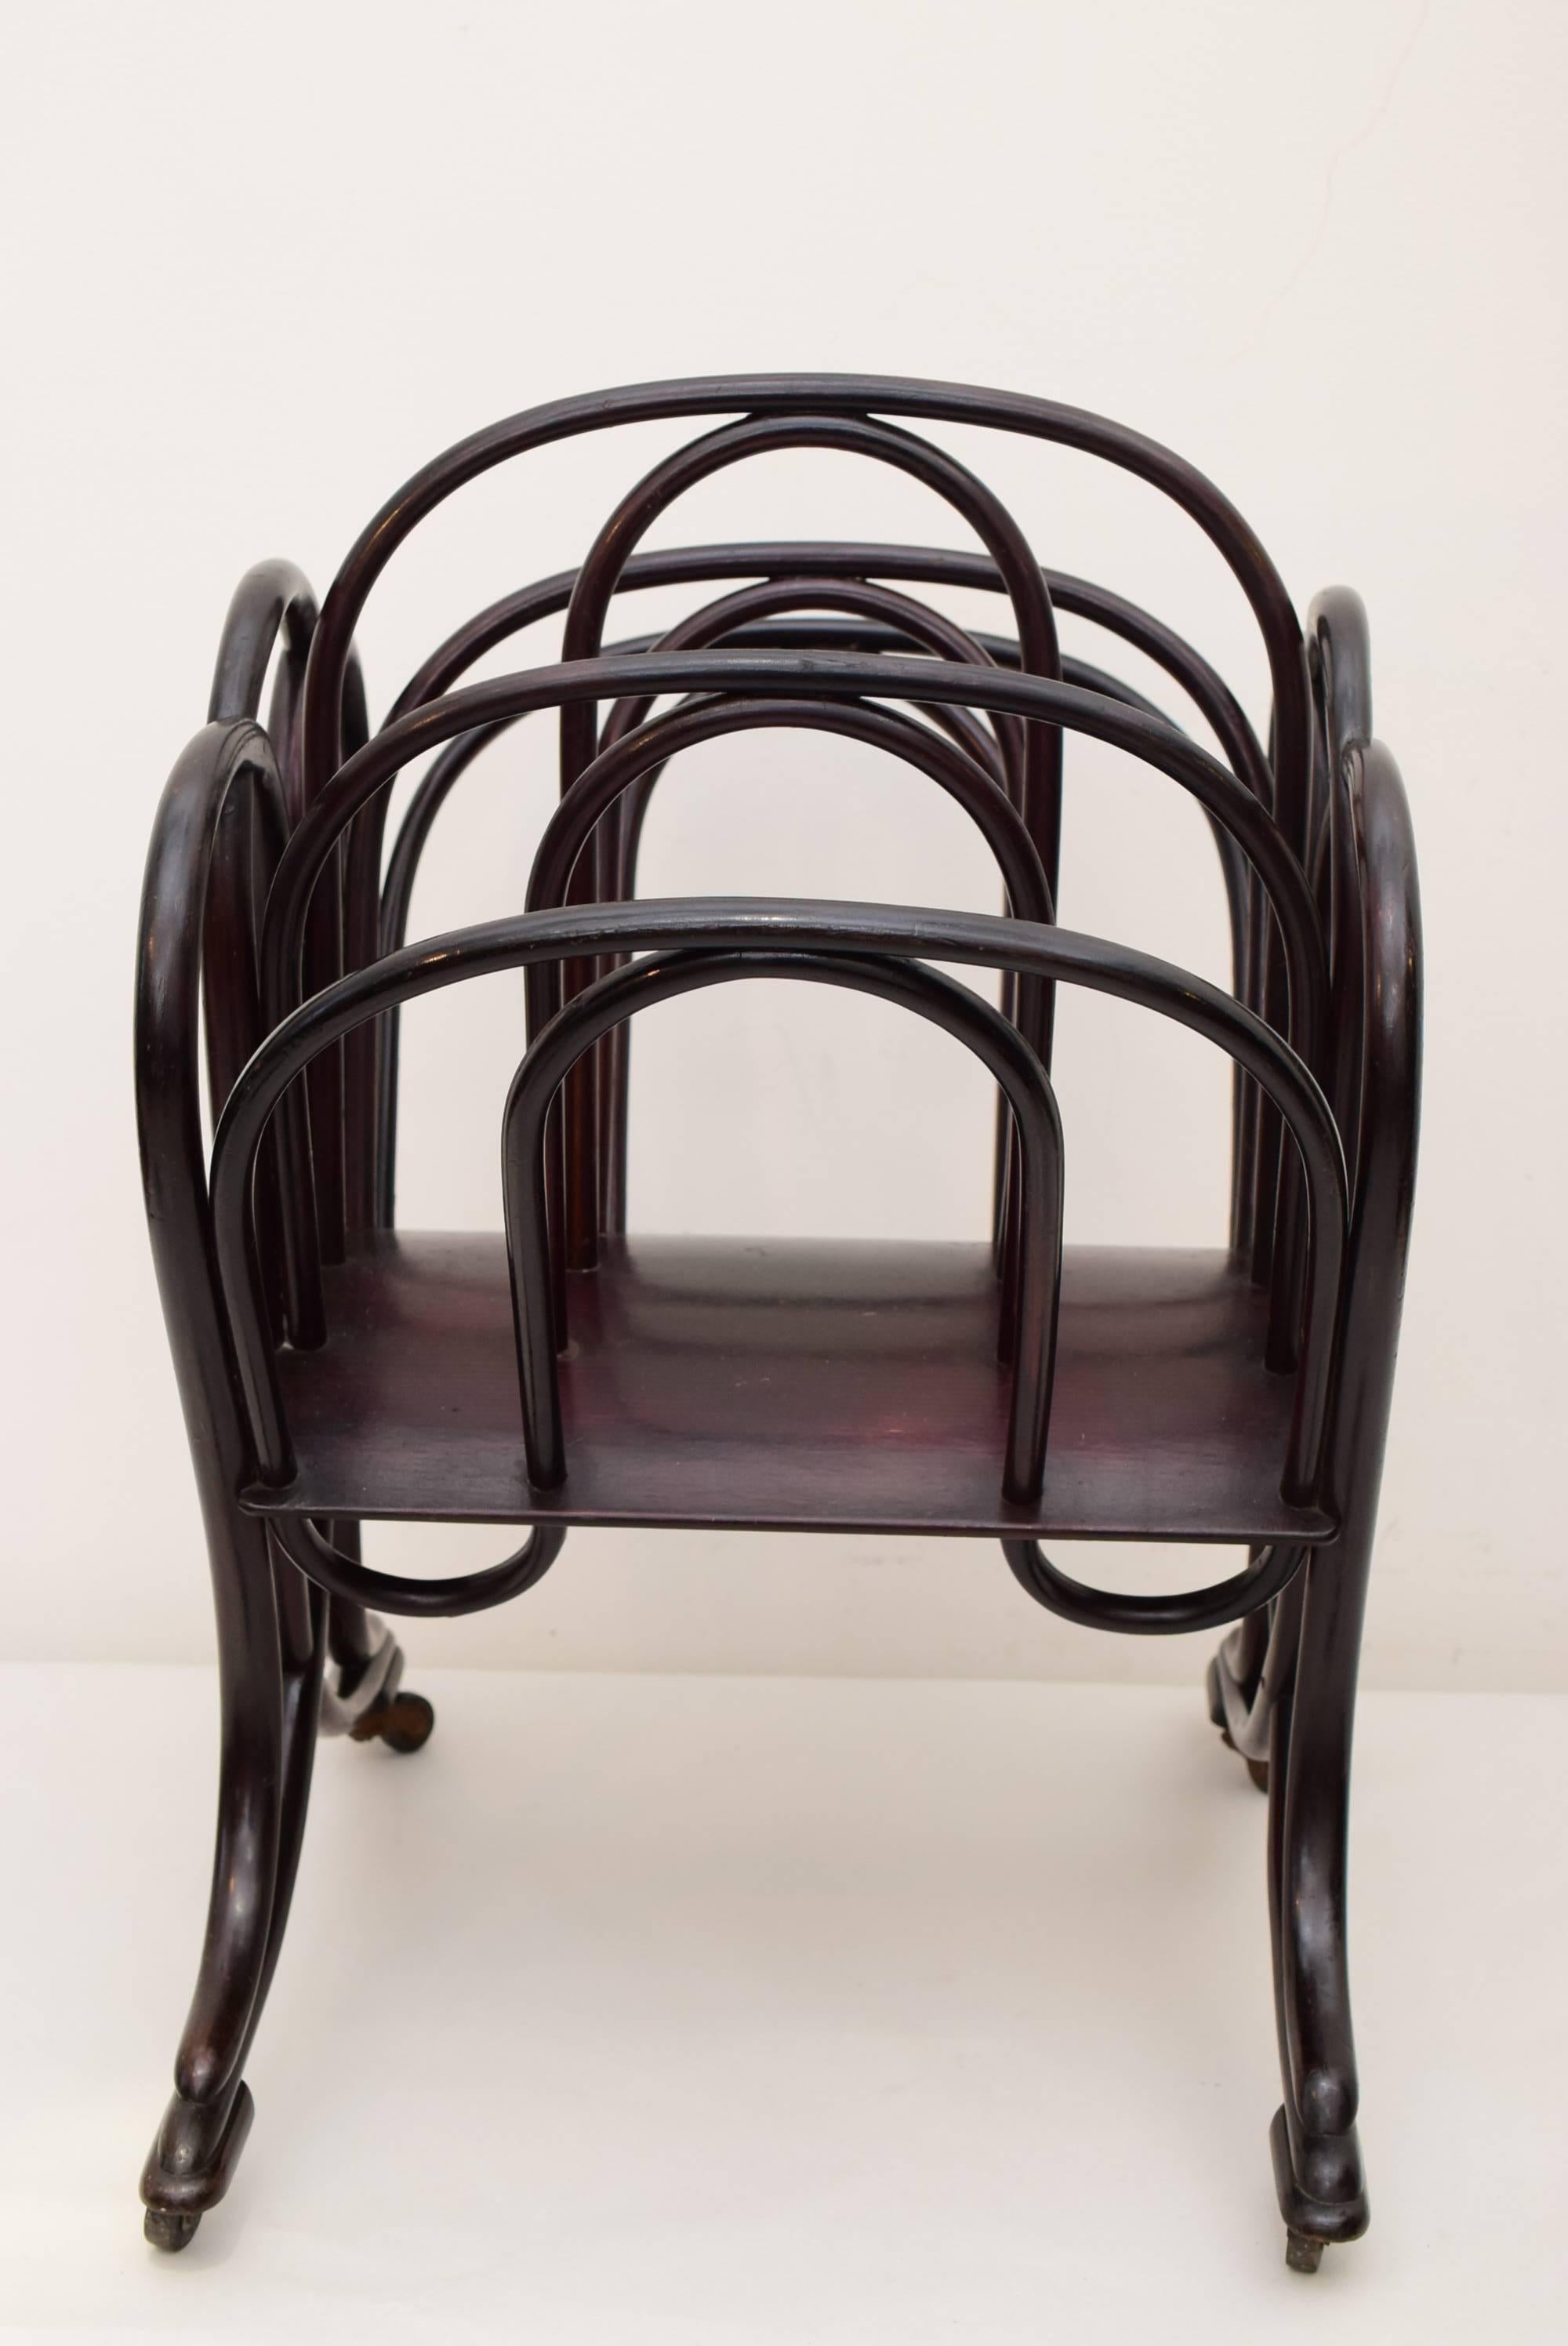 Viennese Thonet bentwood magazine rack with moving wheels.
Original condition.